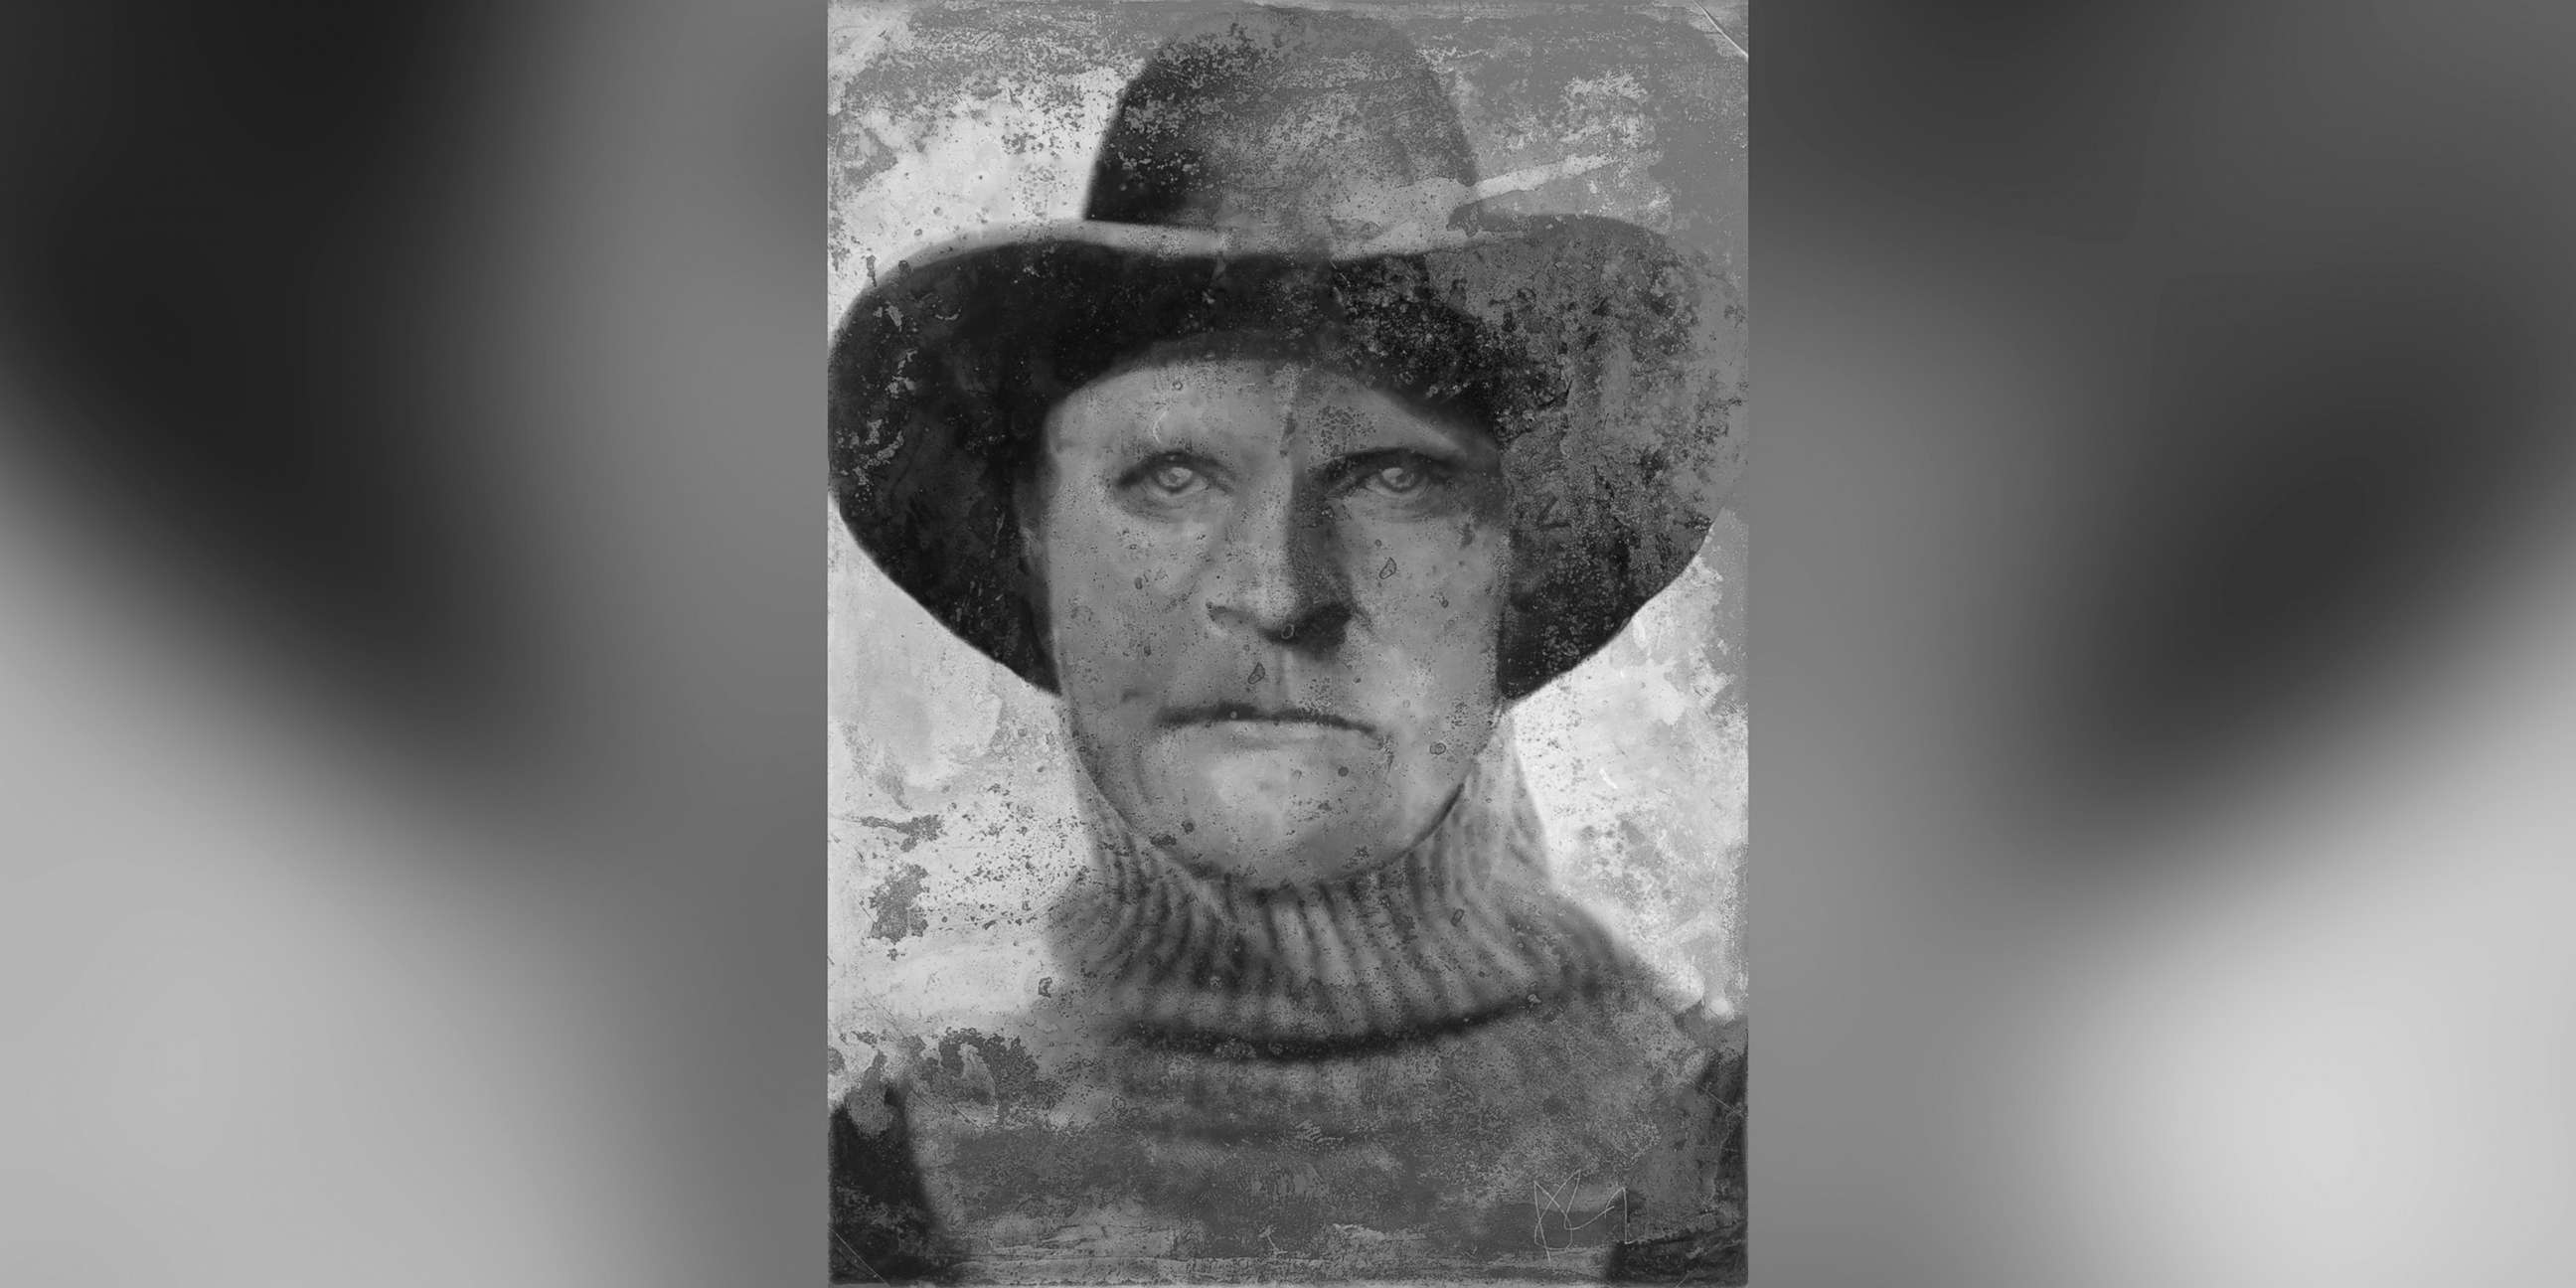 PHOTO: A composite sketch shows Joseph Henry Loveless, a man whose headless torso was found in a remote Idaho cave 40 years ago has finally been identified as Loveless, an outlaw who killed his wife with an ax, last seen after escaping from jail in 1916.